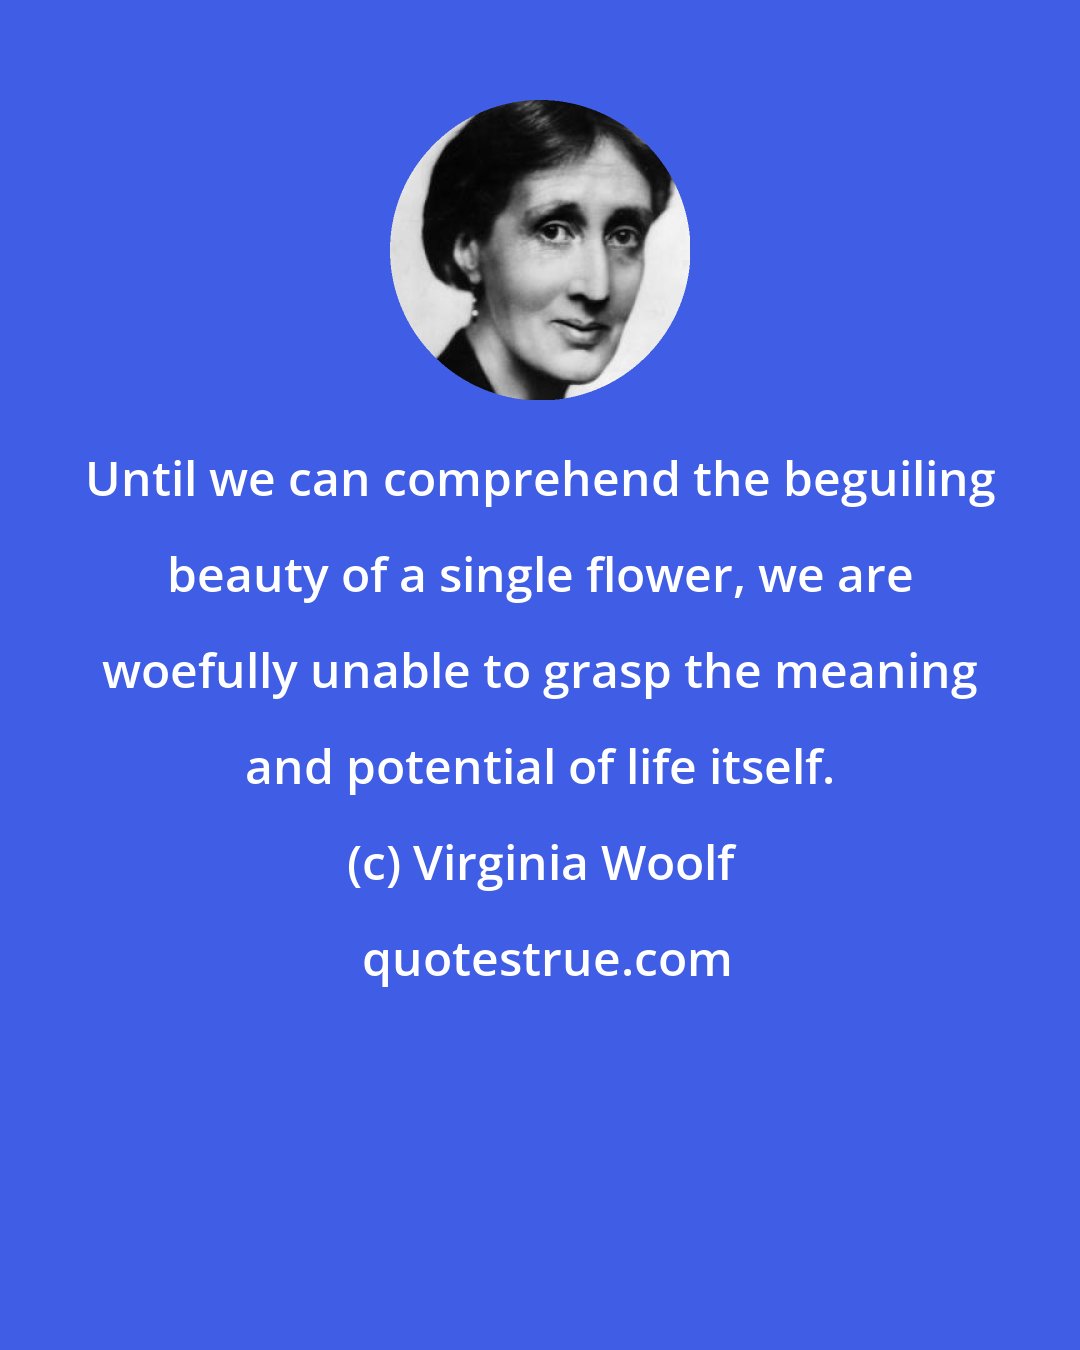 Virginia Woolf: Until we can comprehend the beguiling beauty of a single flower, we are woefully unable to grasp the meaning and potential of life itself.